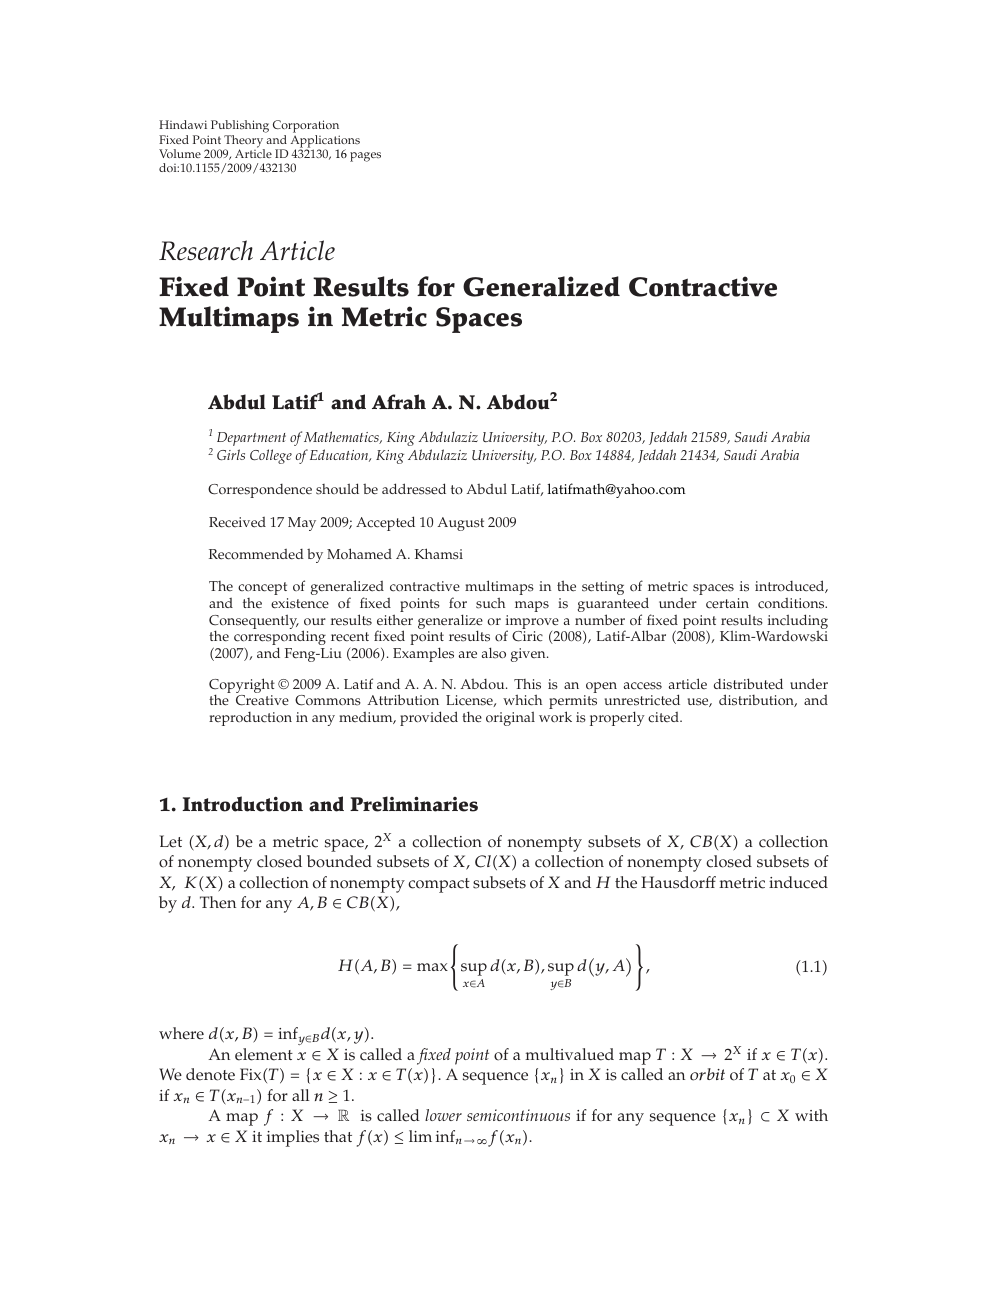 Fixed Point Results For Generalized Contractive Multimaps In Metric Spaces Topic Of Research Paper In Mathematics Download Scholarly Article Pdf And Read For Free On Cyberleninka Open Science Hub